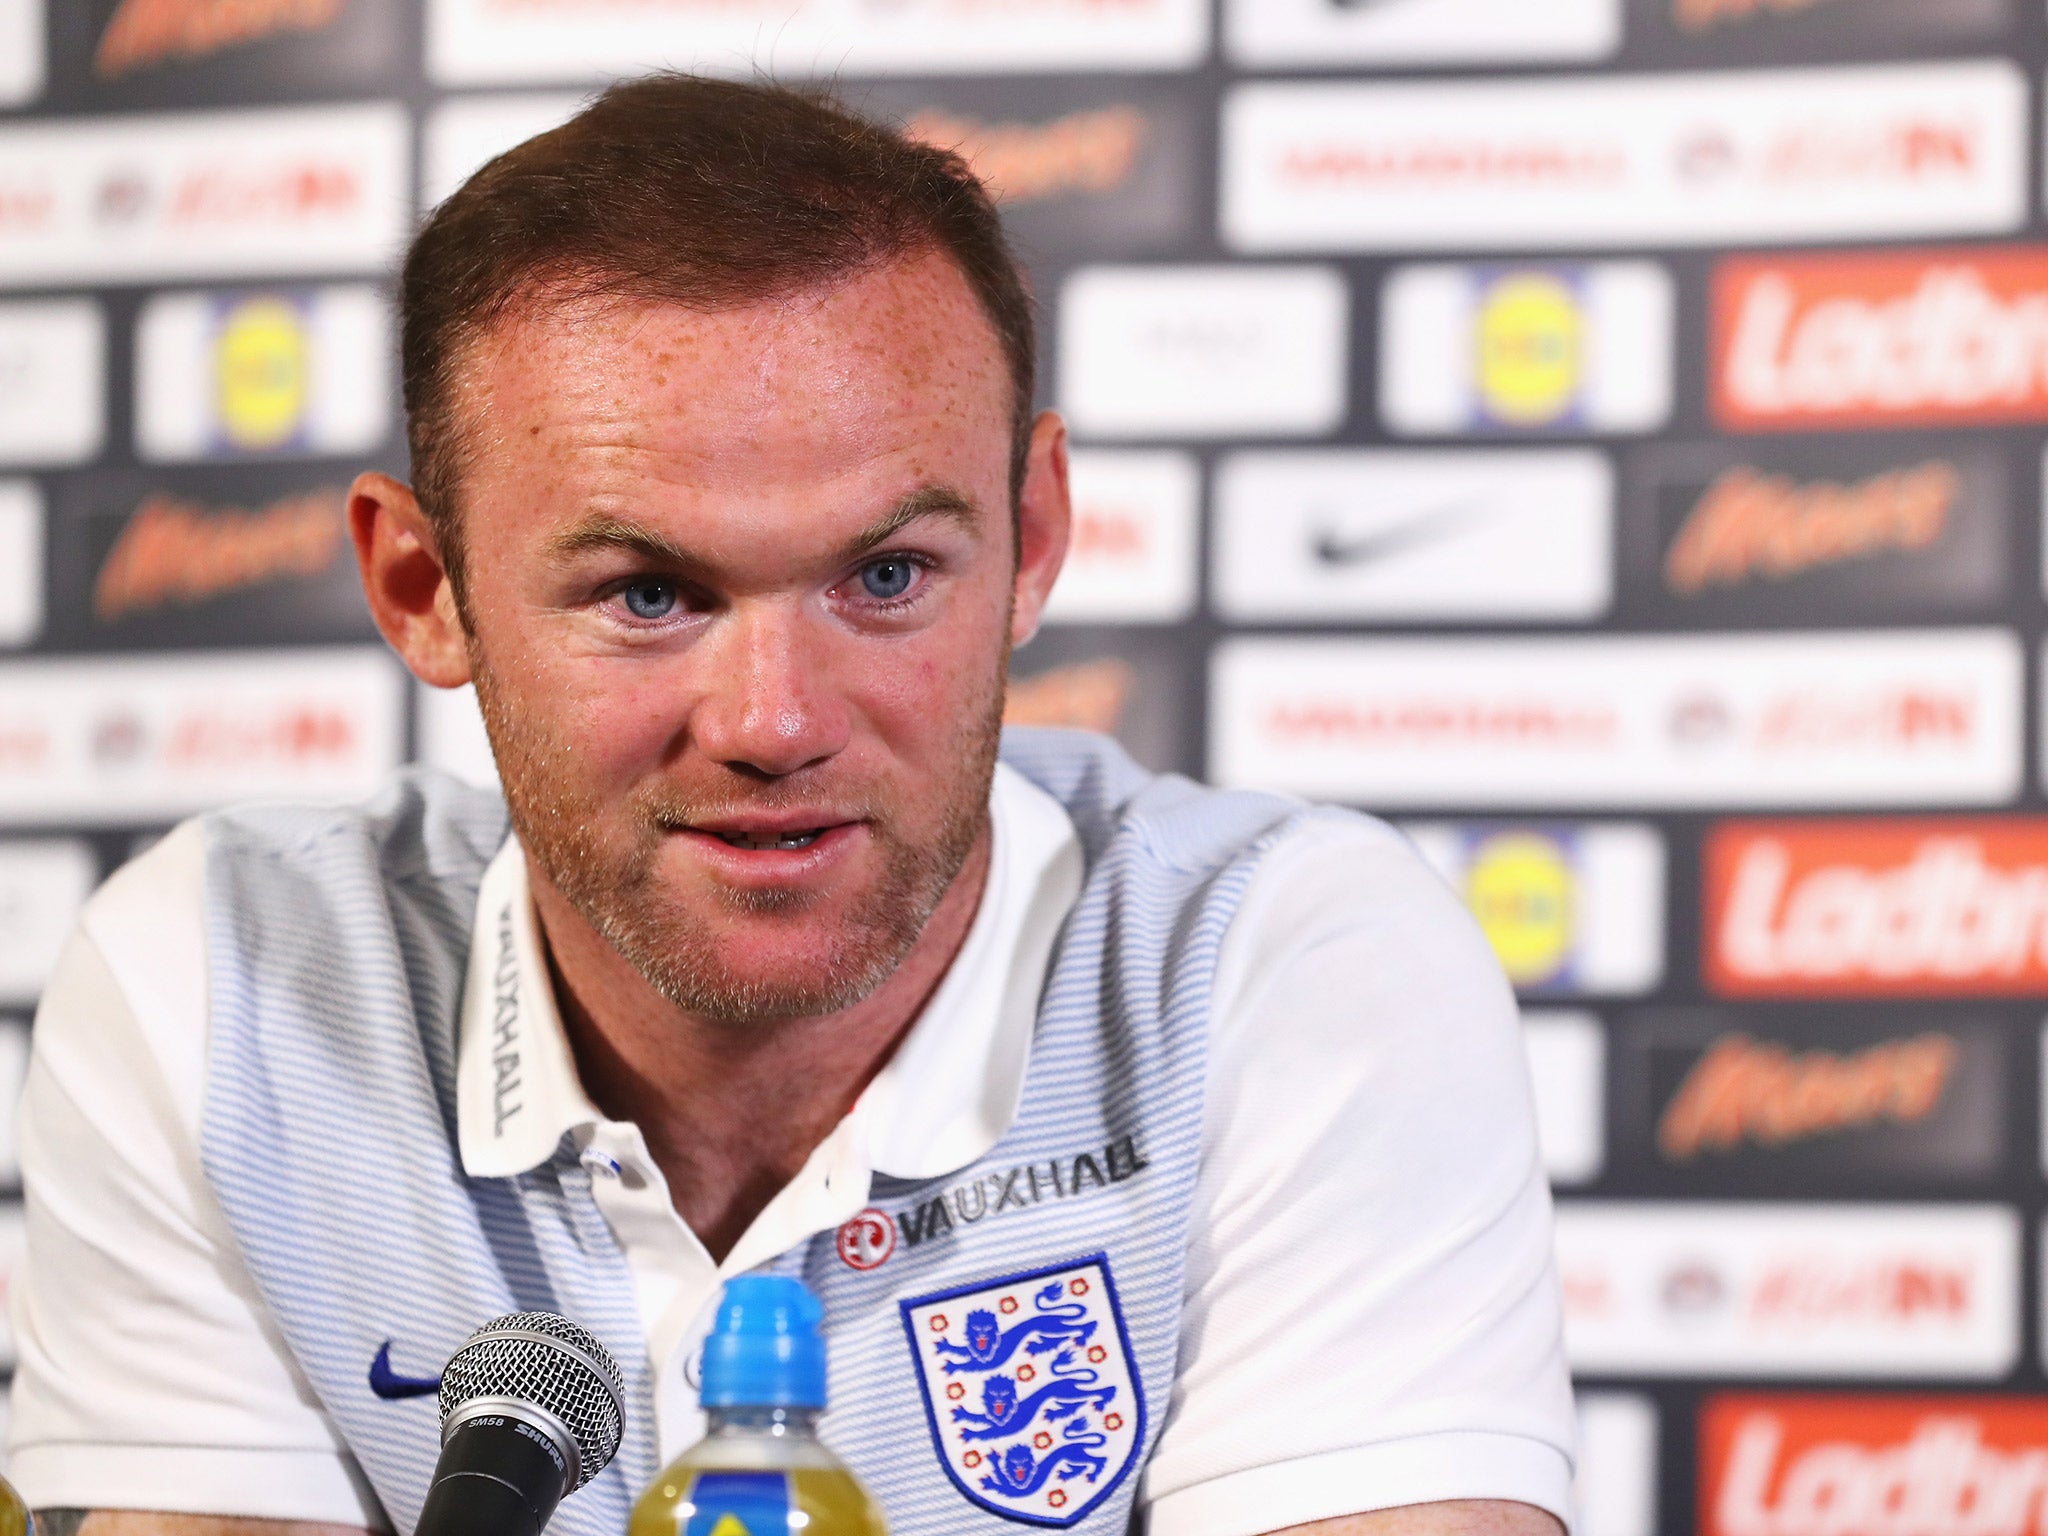 Wayne Rooney has revealed he will retire from international football after the 2018 World Cup